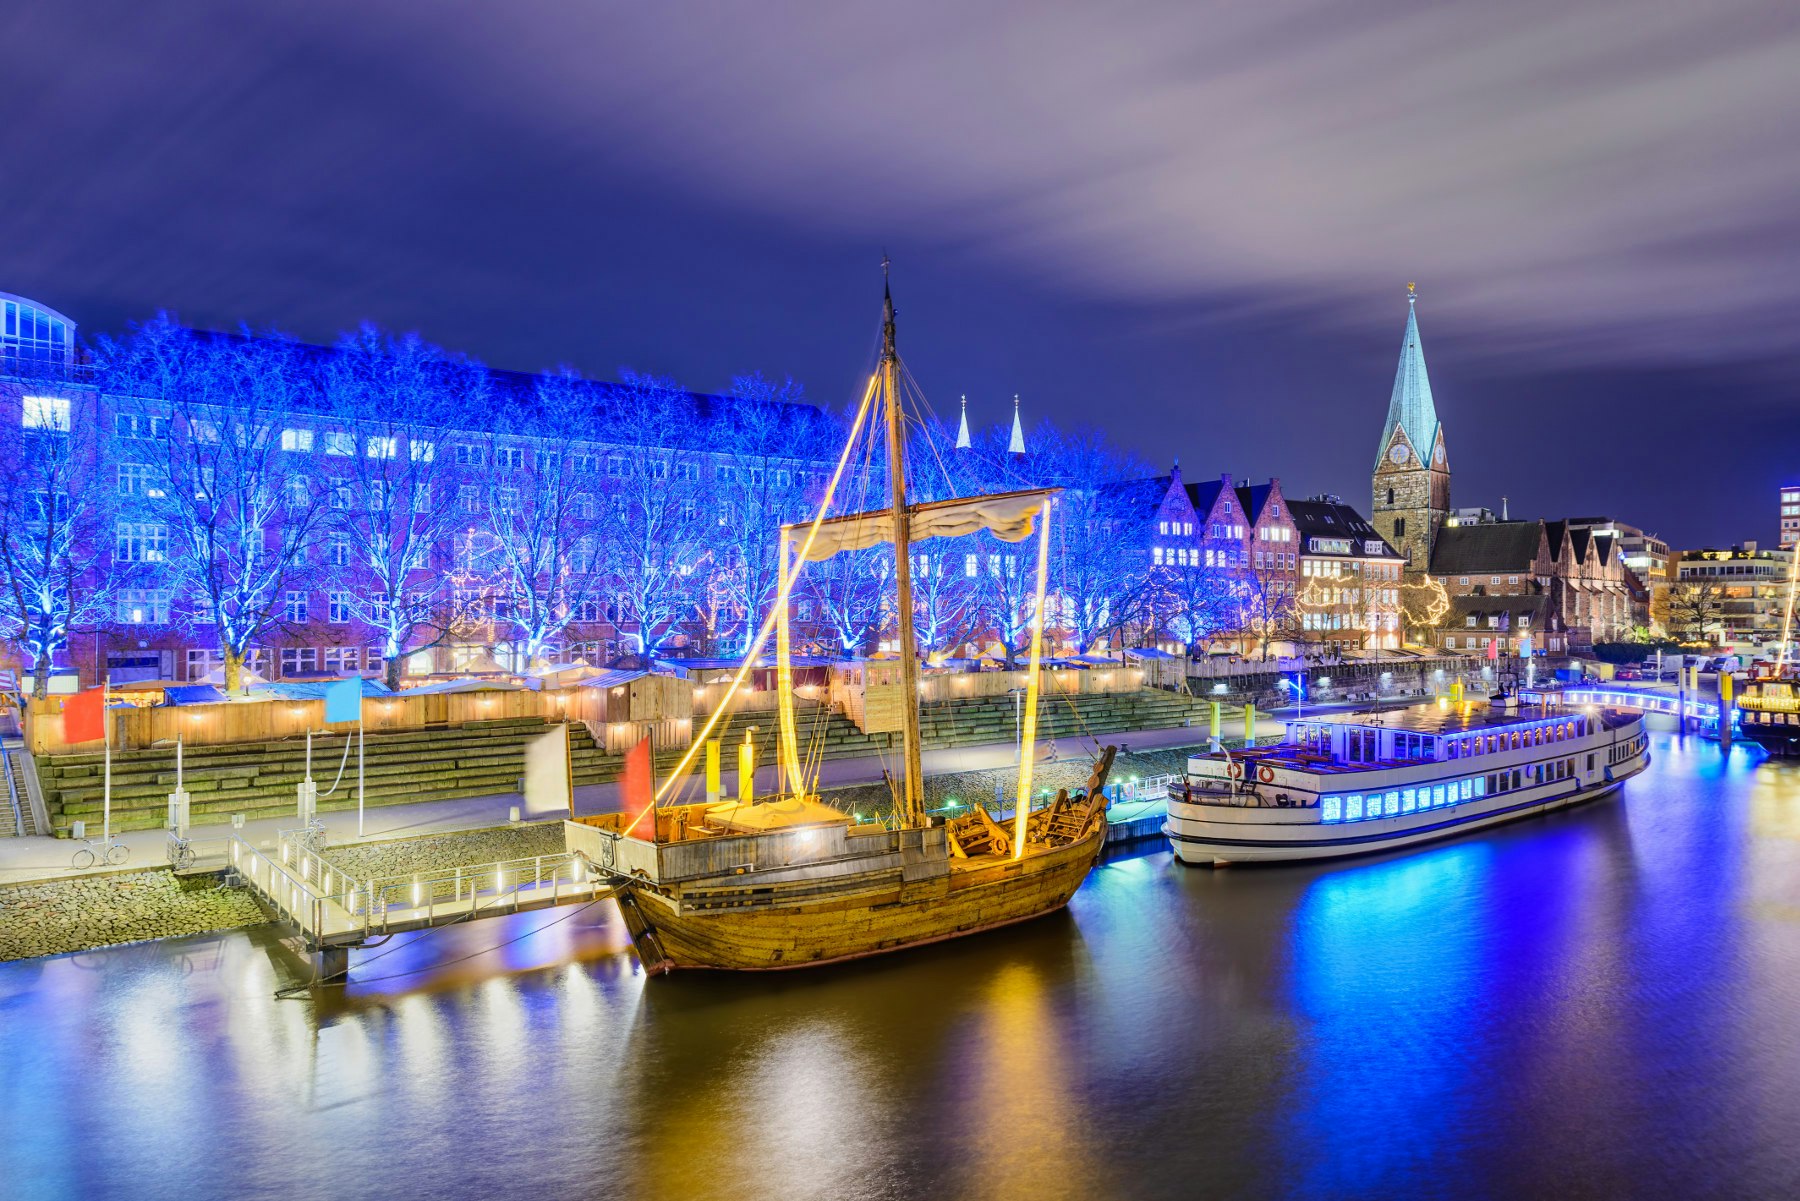 Ships on the river in Bremen lit up. In the background are a row of houses completely illuminated by blue lights.